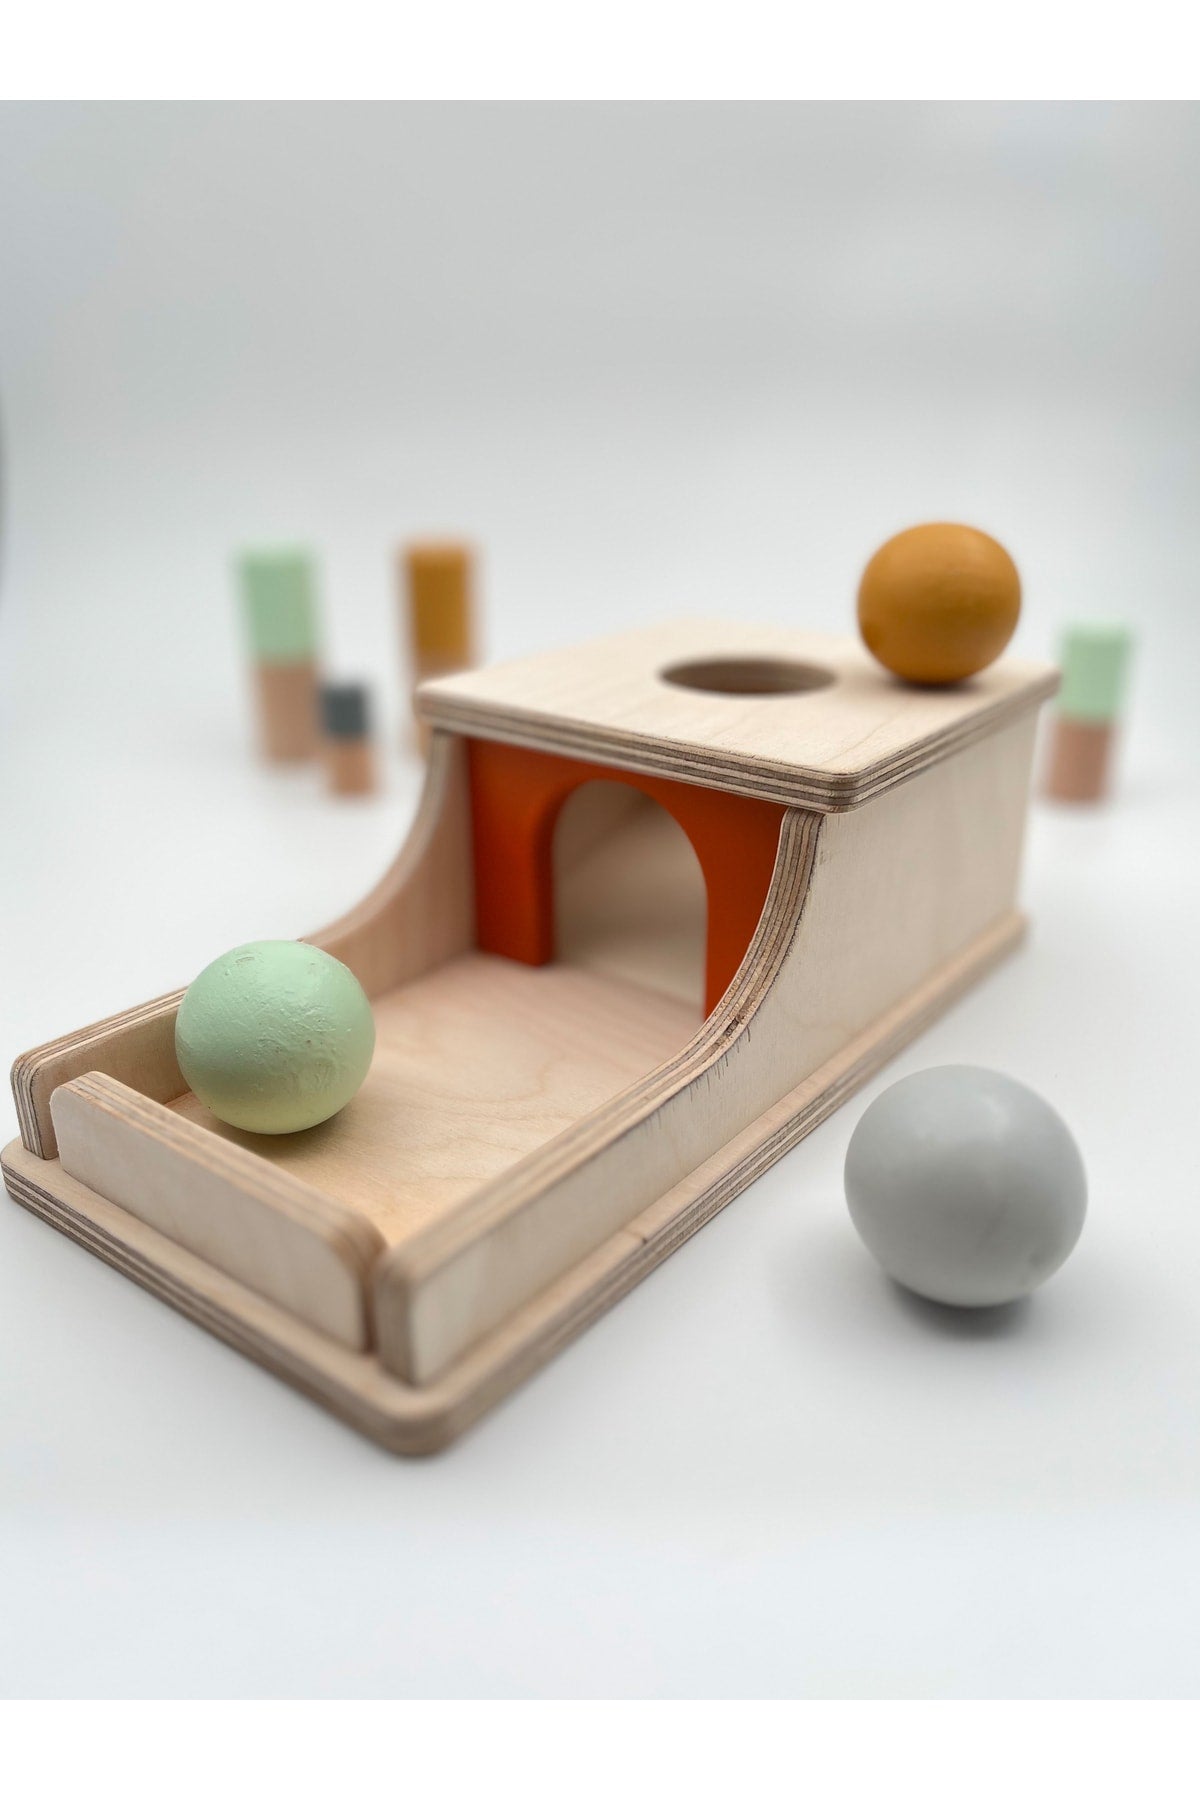 Montessori Continuity Box, Pastel Colored Balls, Educational Wooden Toy